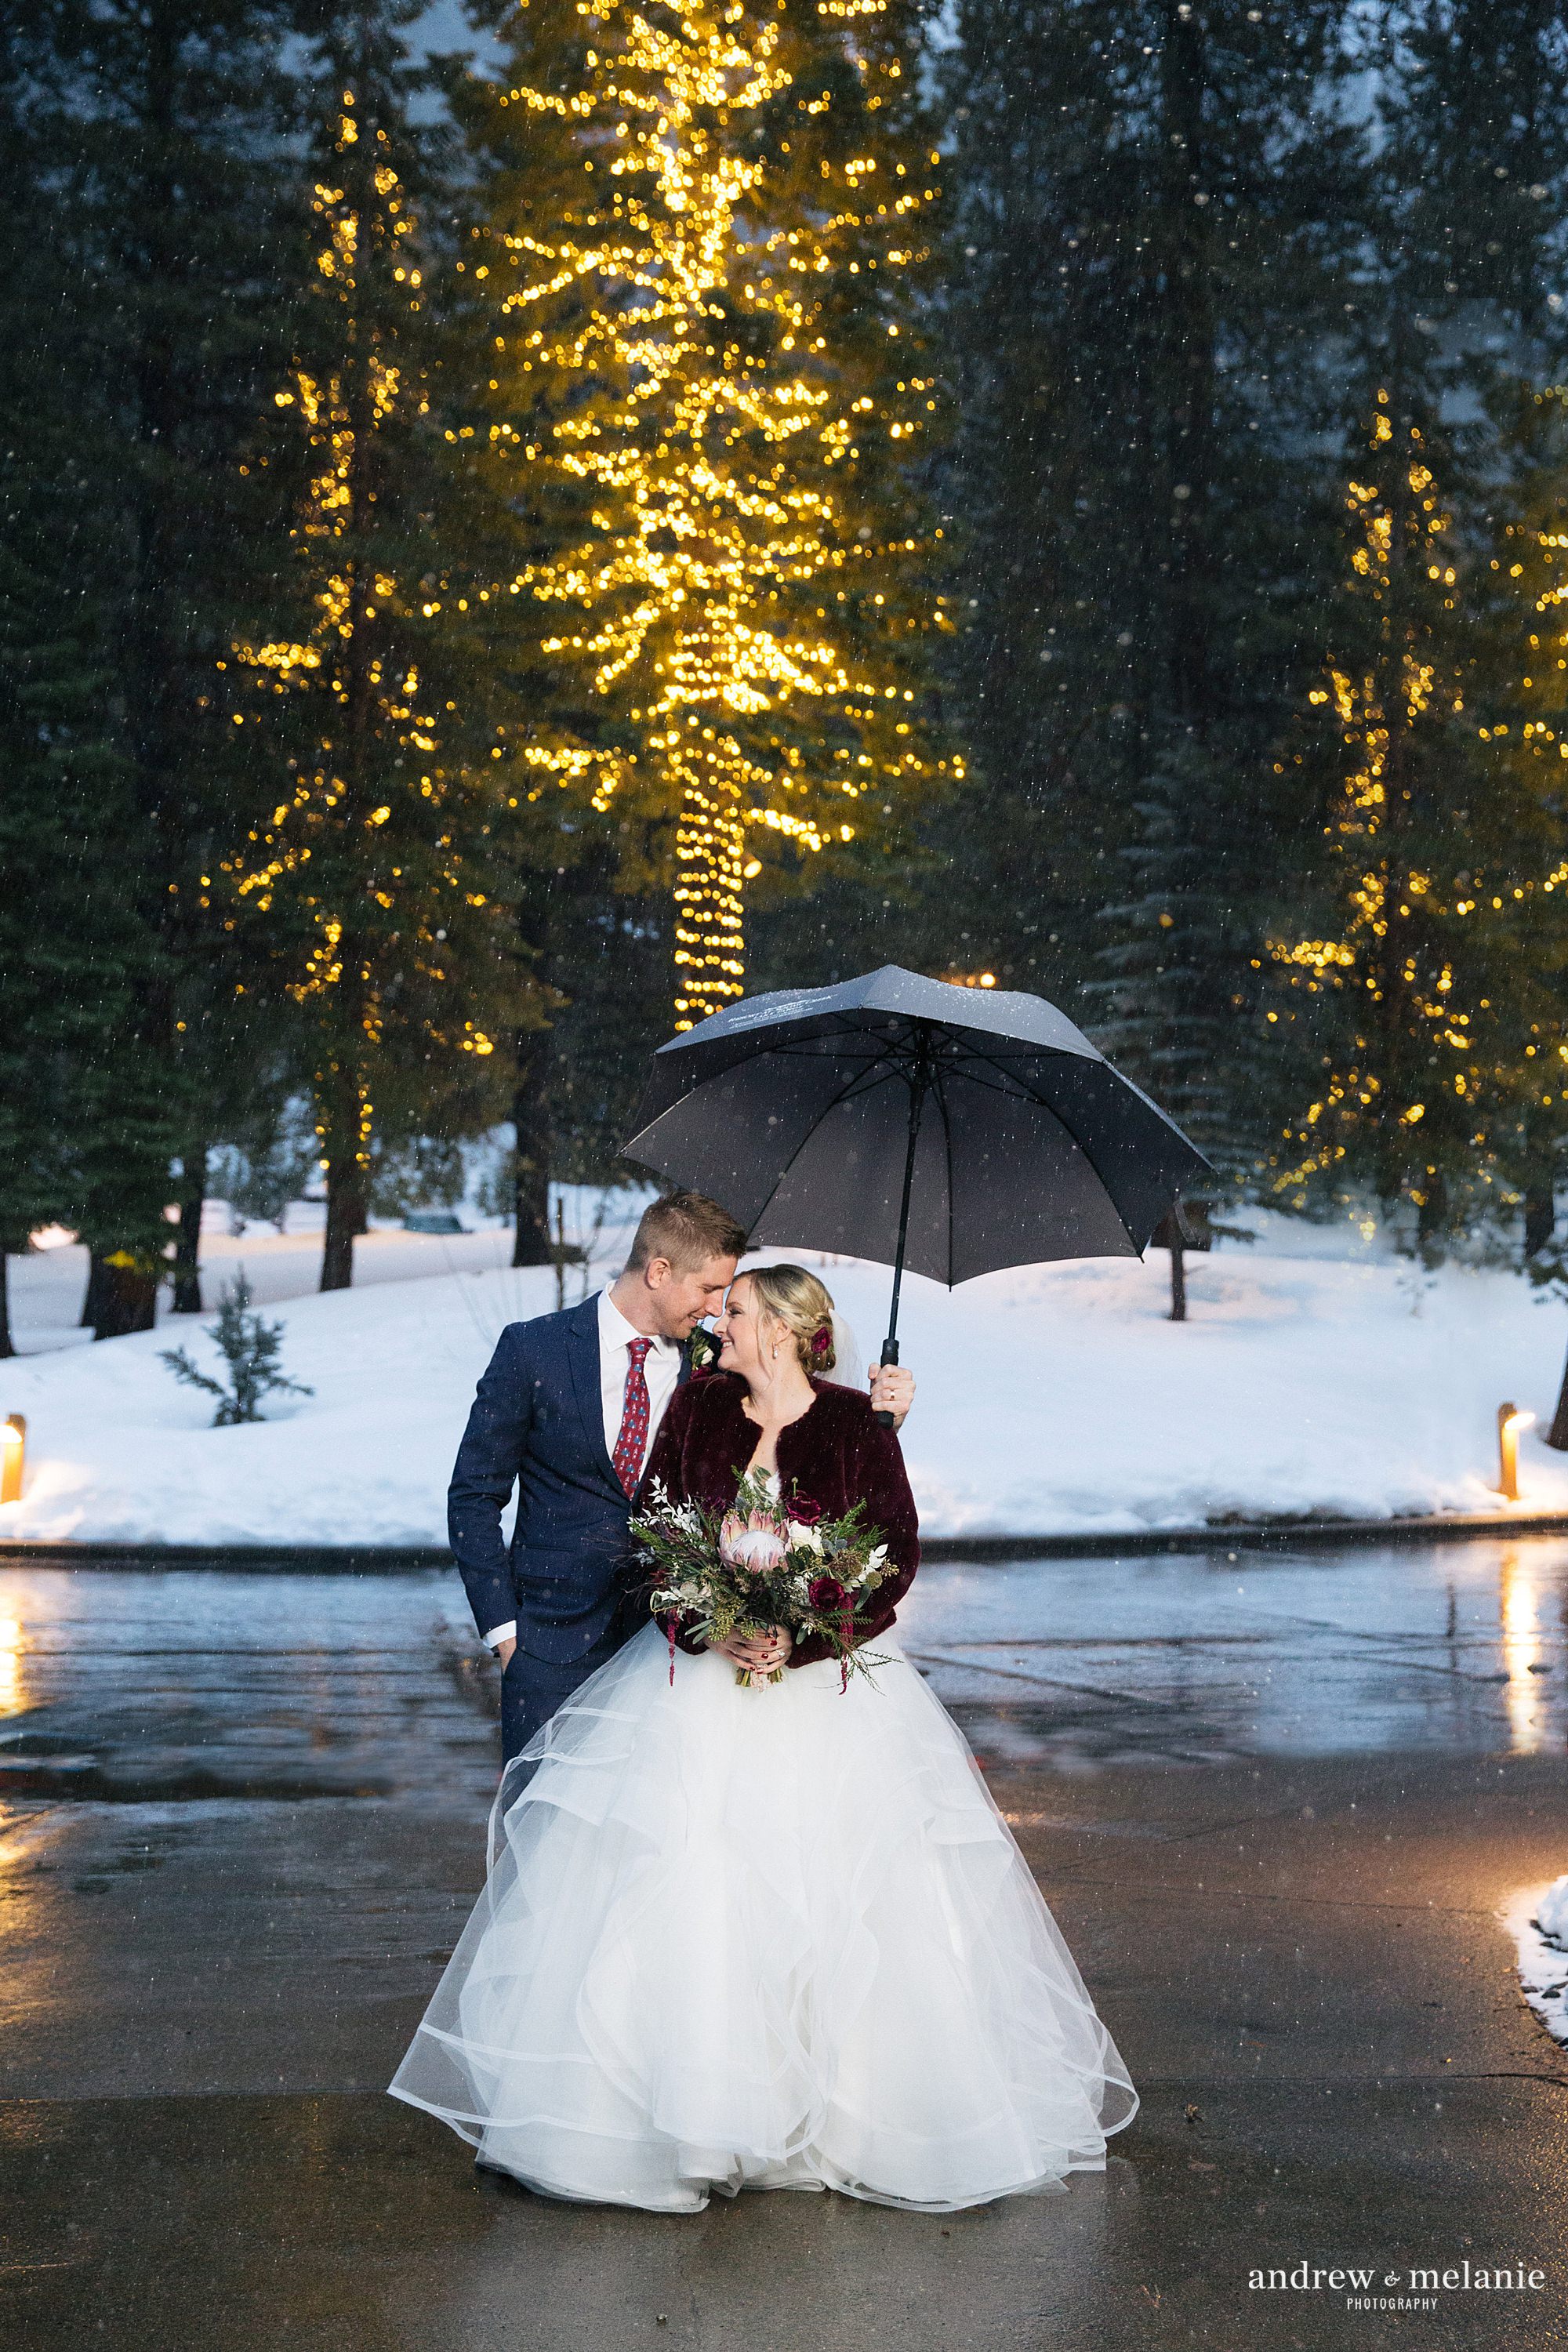 Bride and groom on snowy rainy day at squaw valley resort lake tahoe